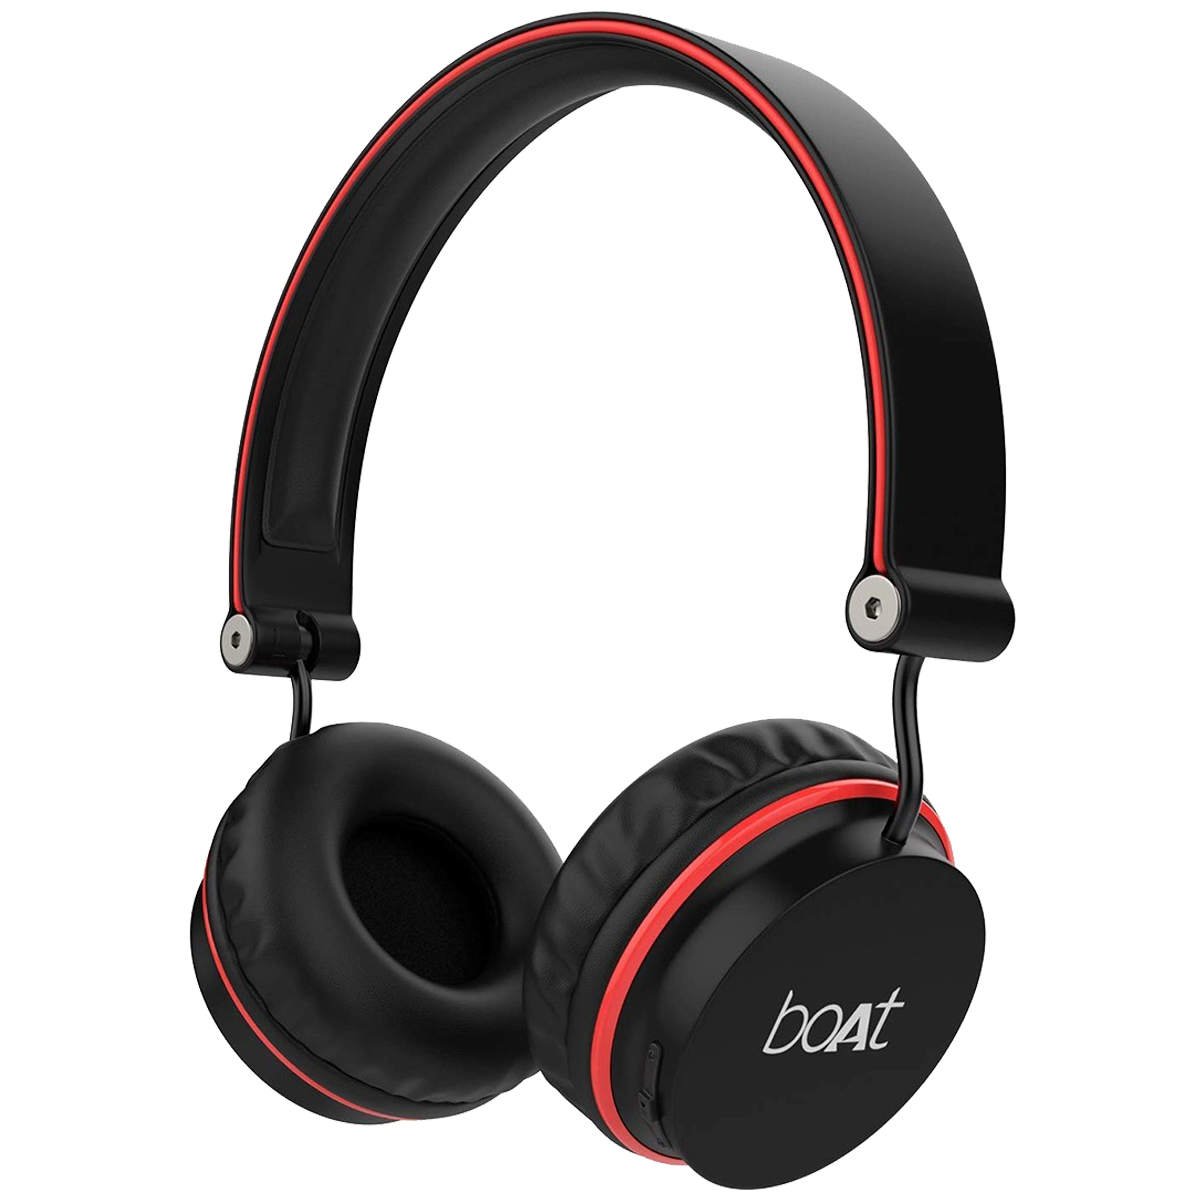 Boat - boat Rockerz 410 On-Ear Passive noise Cancellation Wireless Headphone with Mic (Bluetooth 5.0, HD Sound, Black/Red)